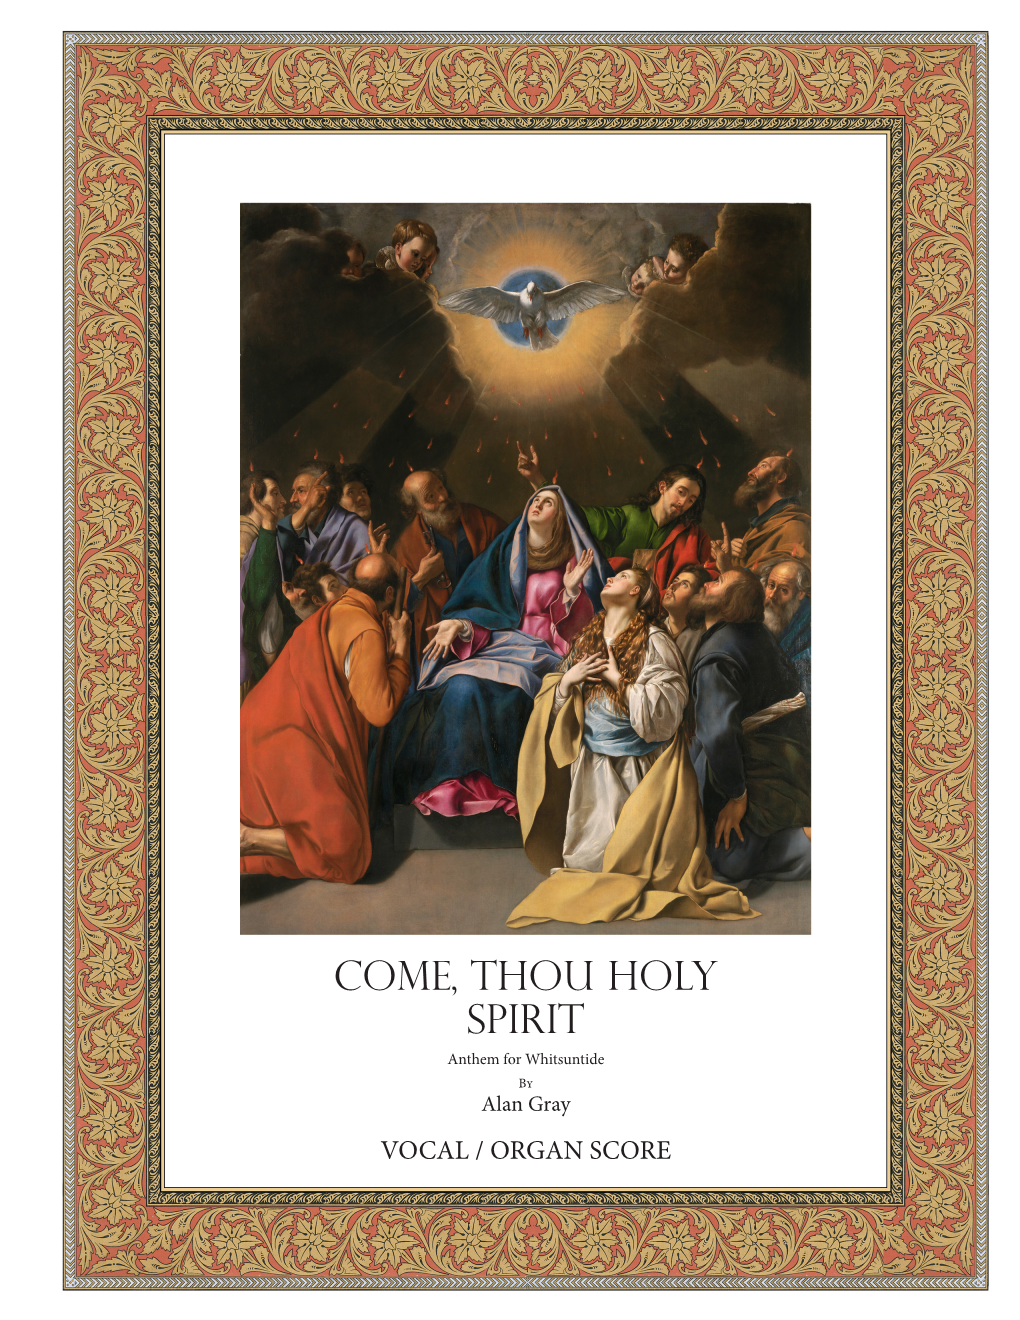 Come, Thou Holy Spirit Anthem for Whitsuntide by Alan Gray VOCAL / ORGAN SCORE 2